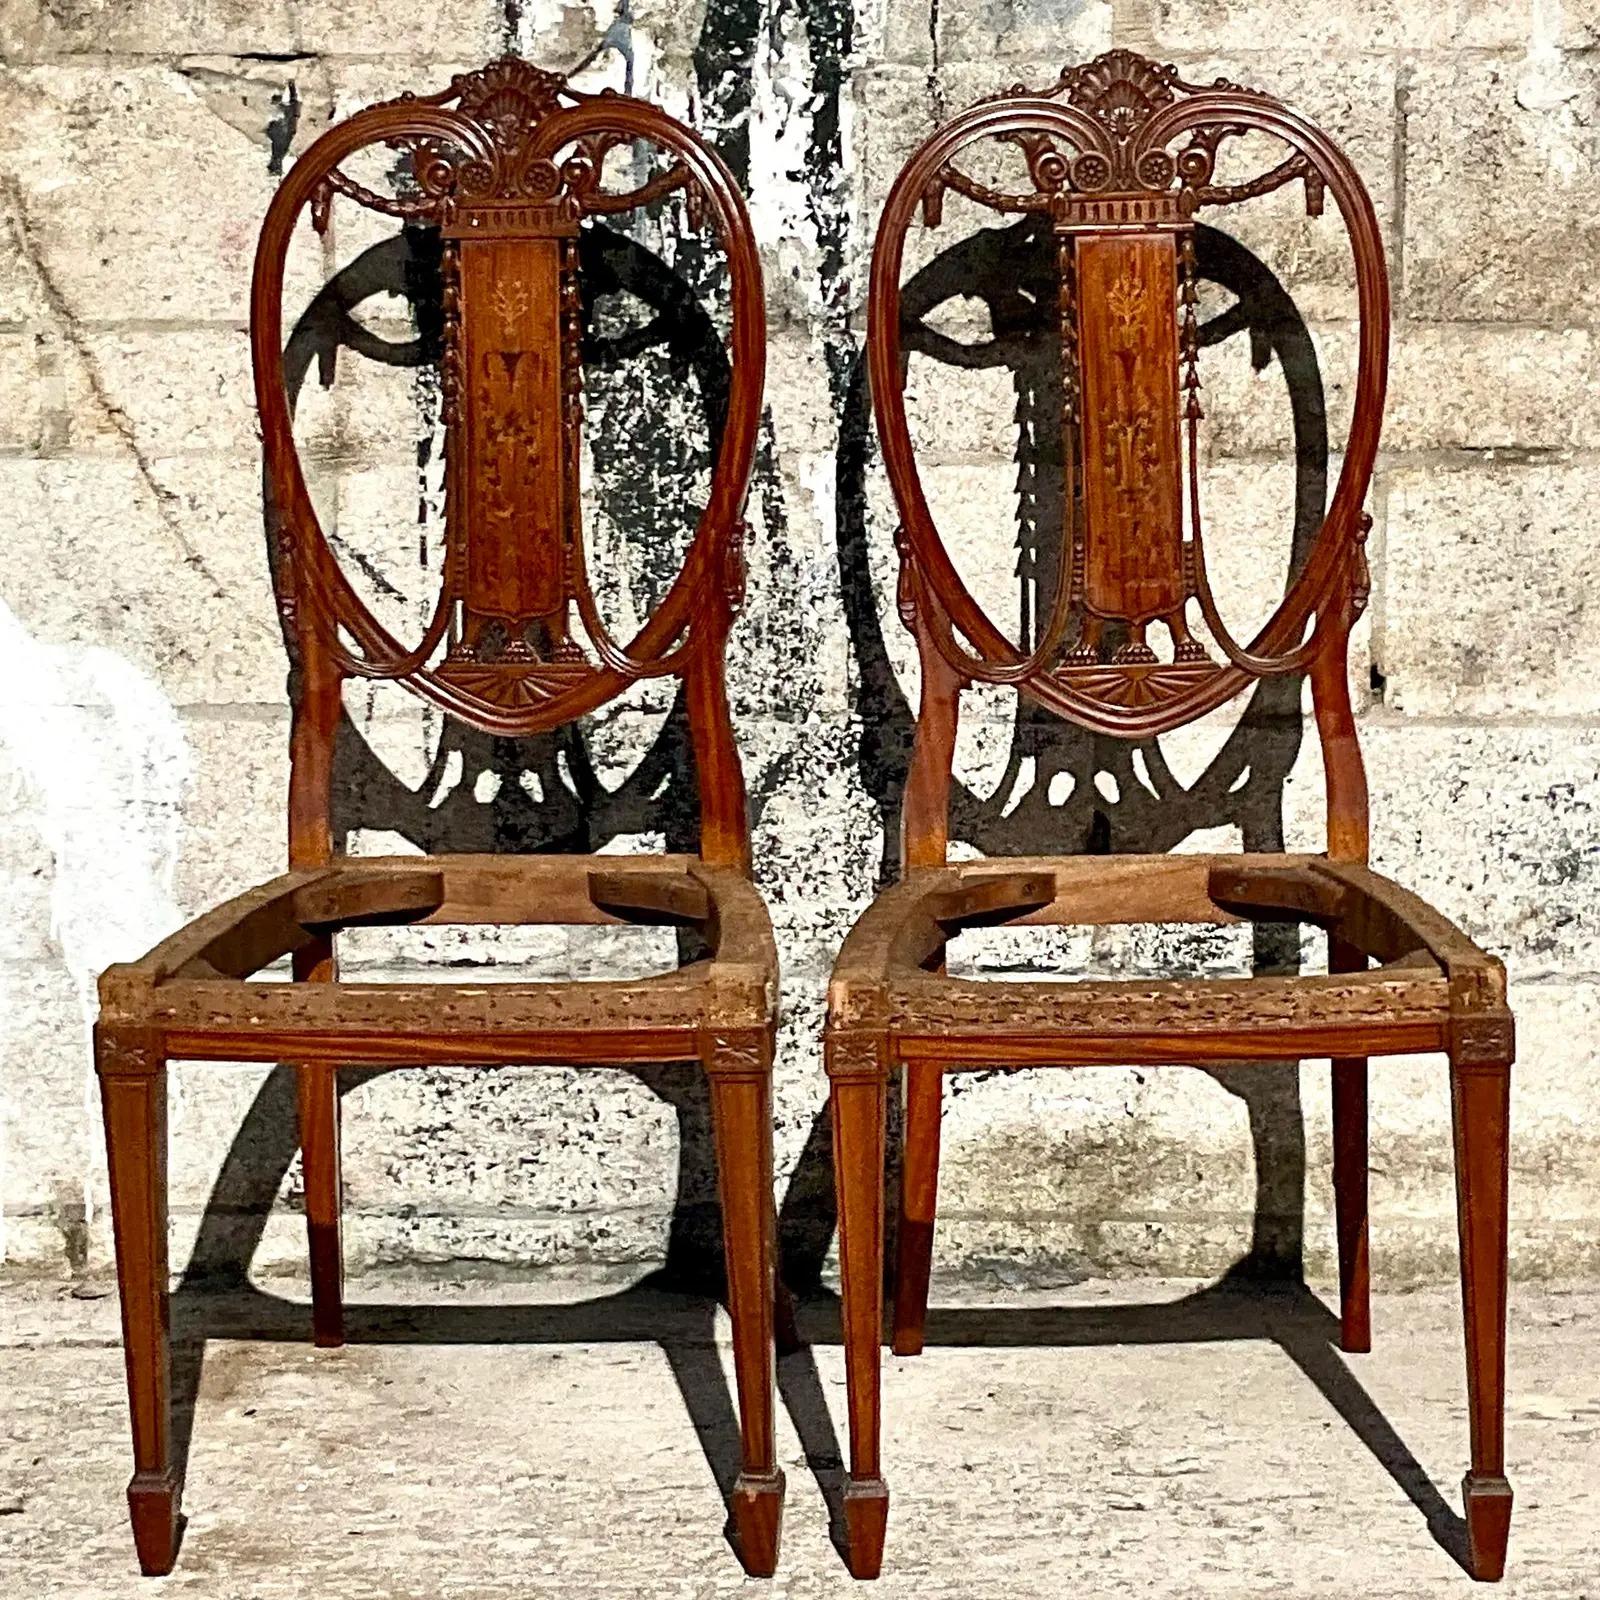 20th Century Vintage Regency Marquetry Balloon Back Chairs - a Pair For Sale